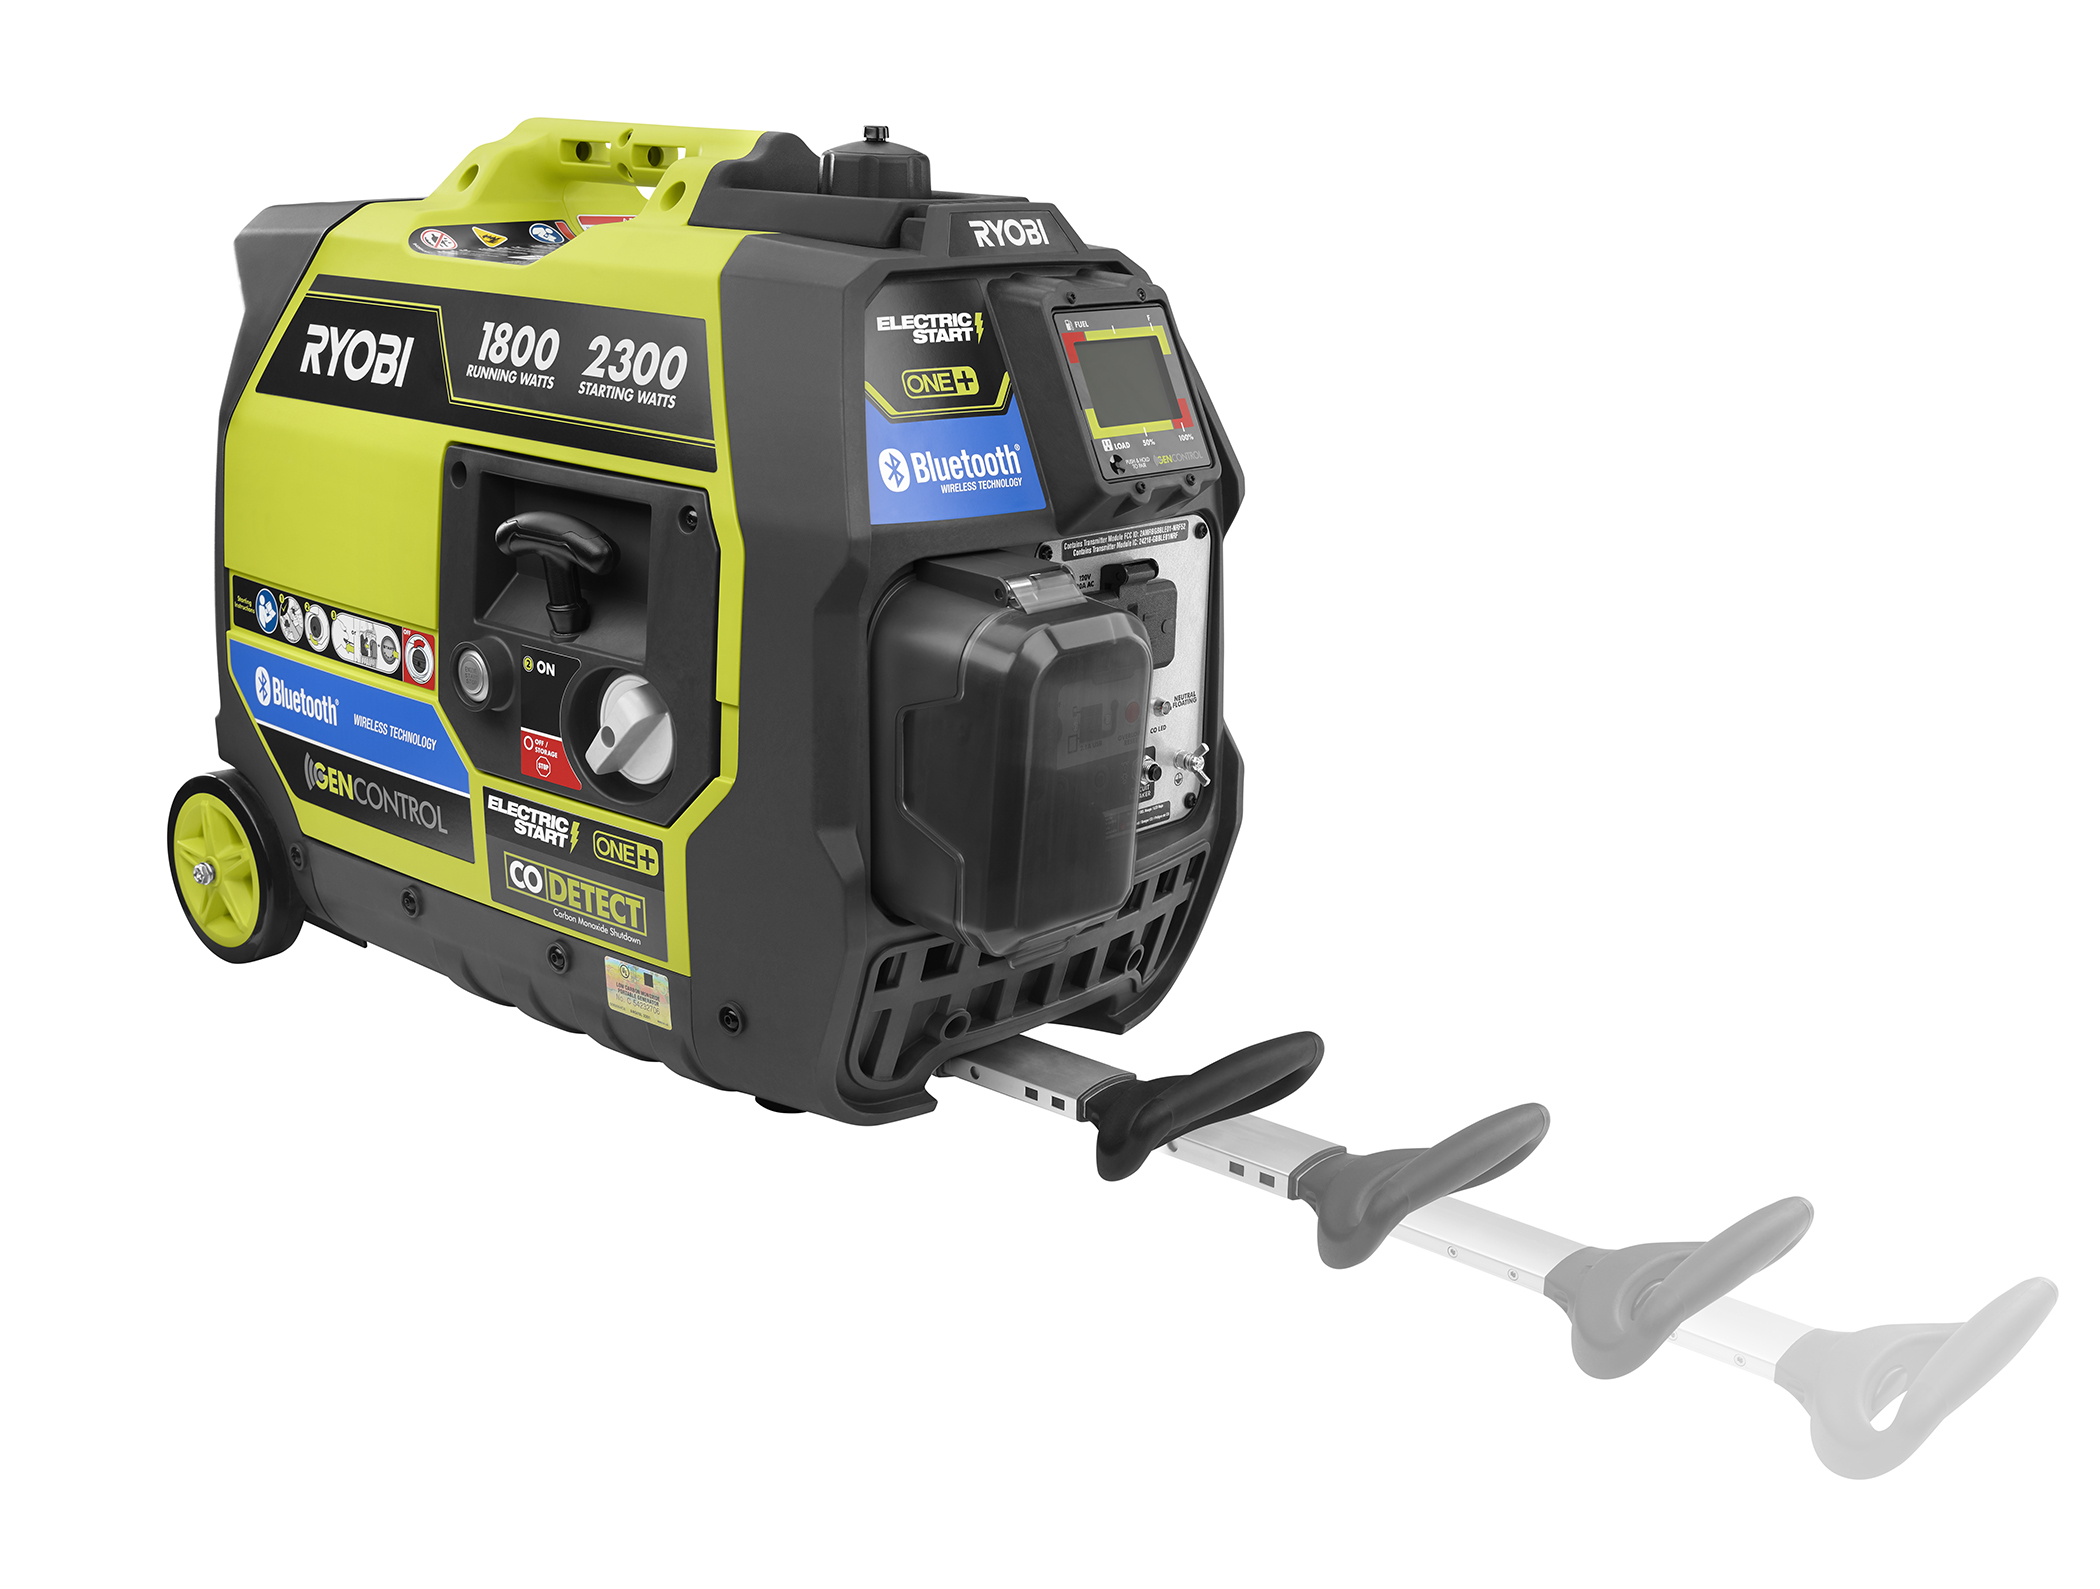 First Look at the New Ryobi Battery-Powered Inverter Generator (1500W)